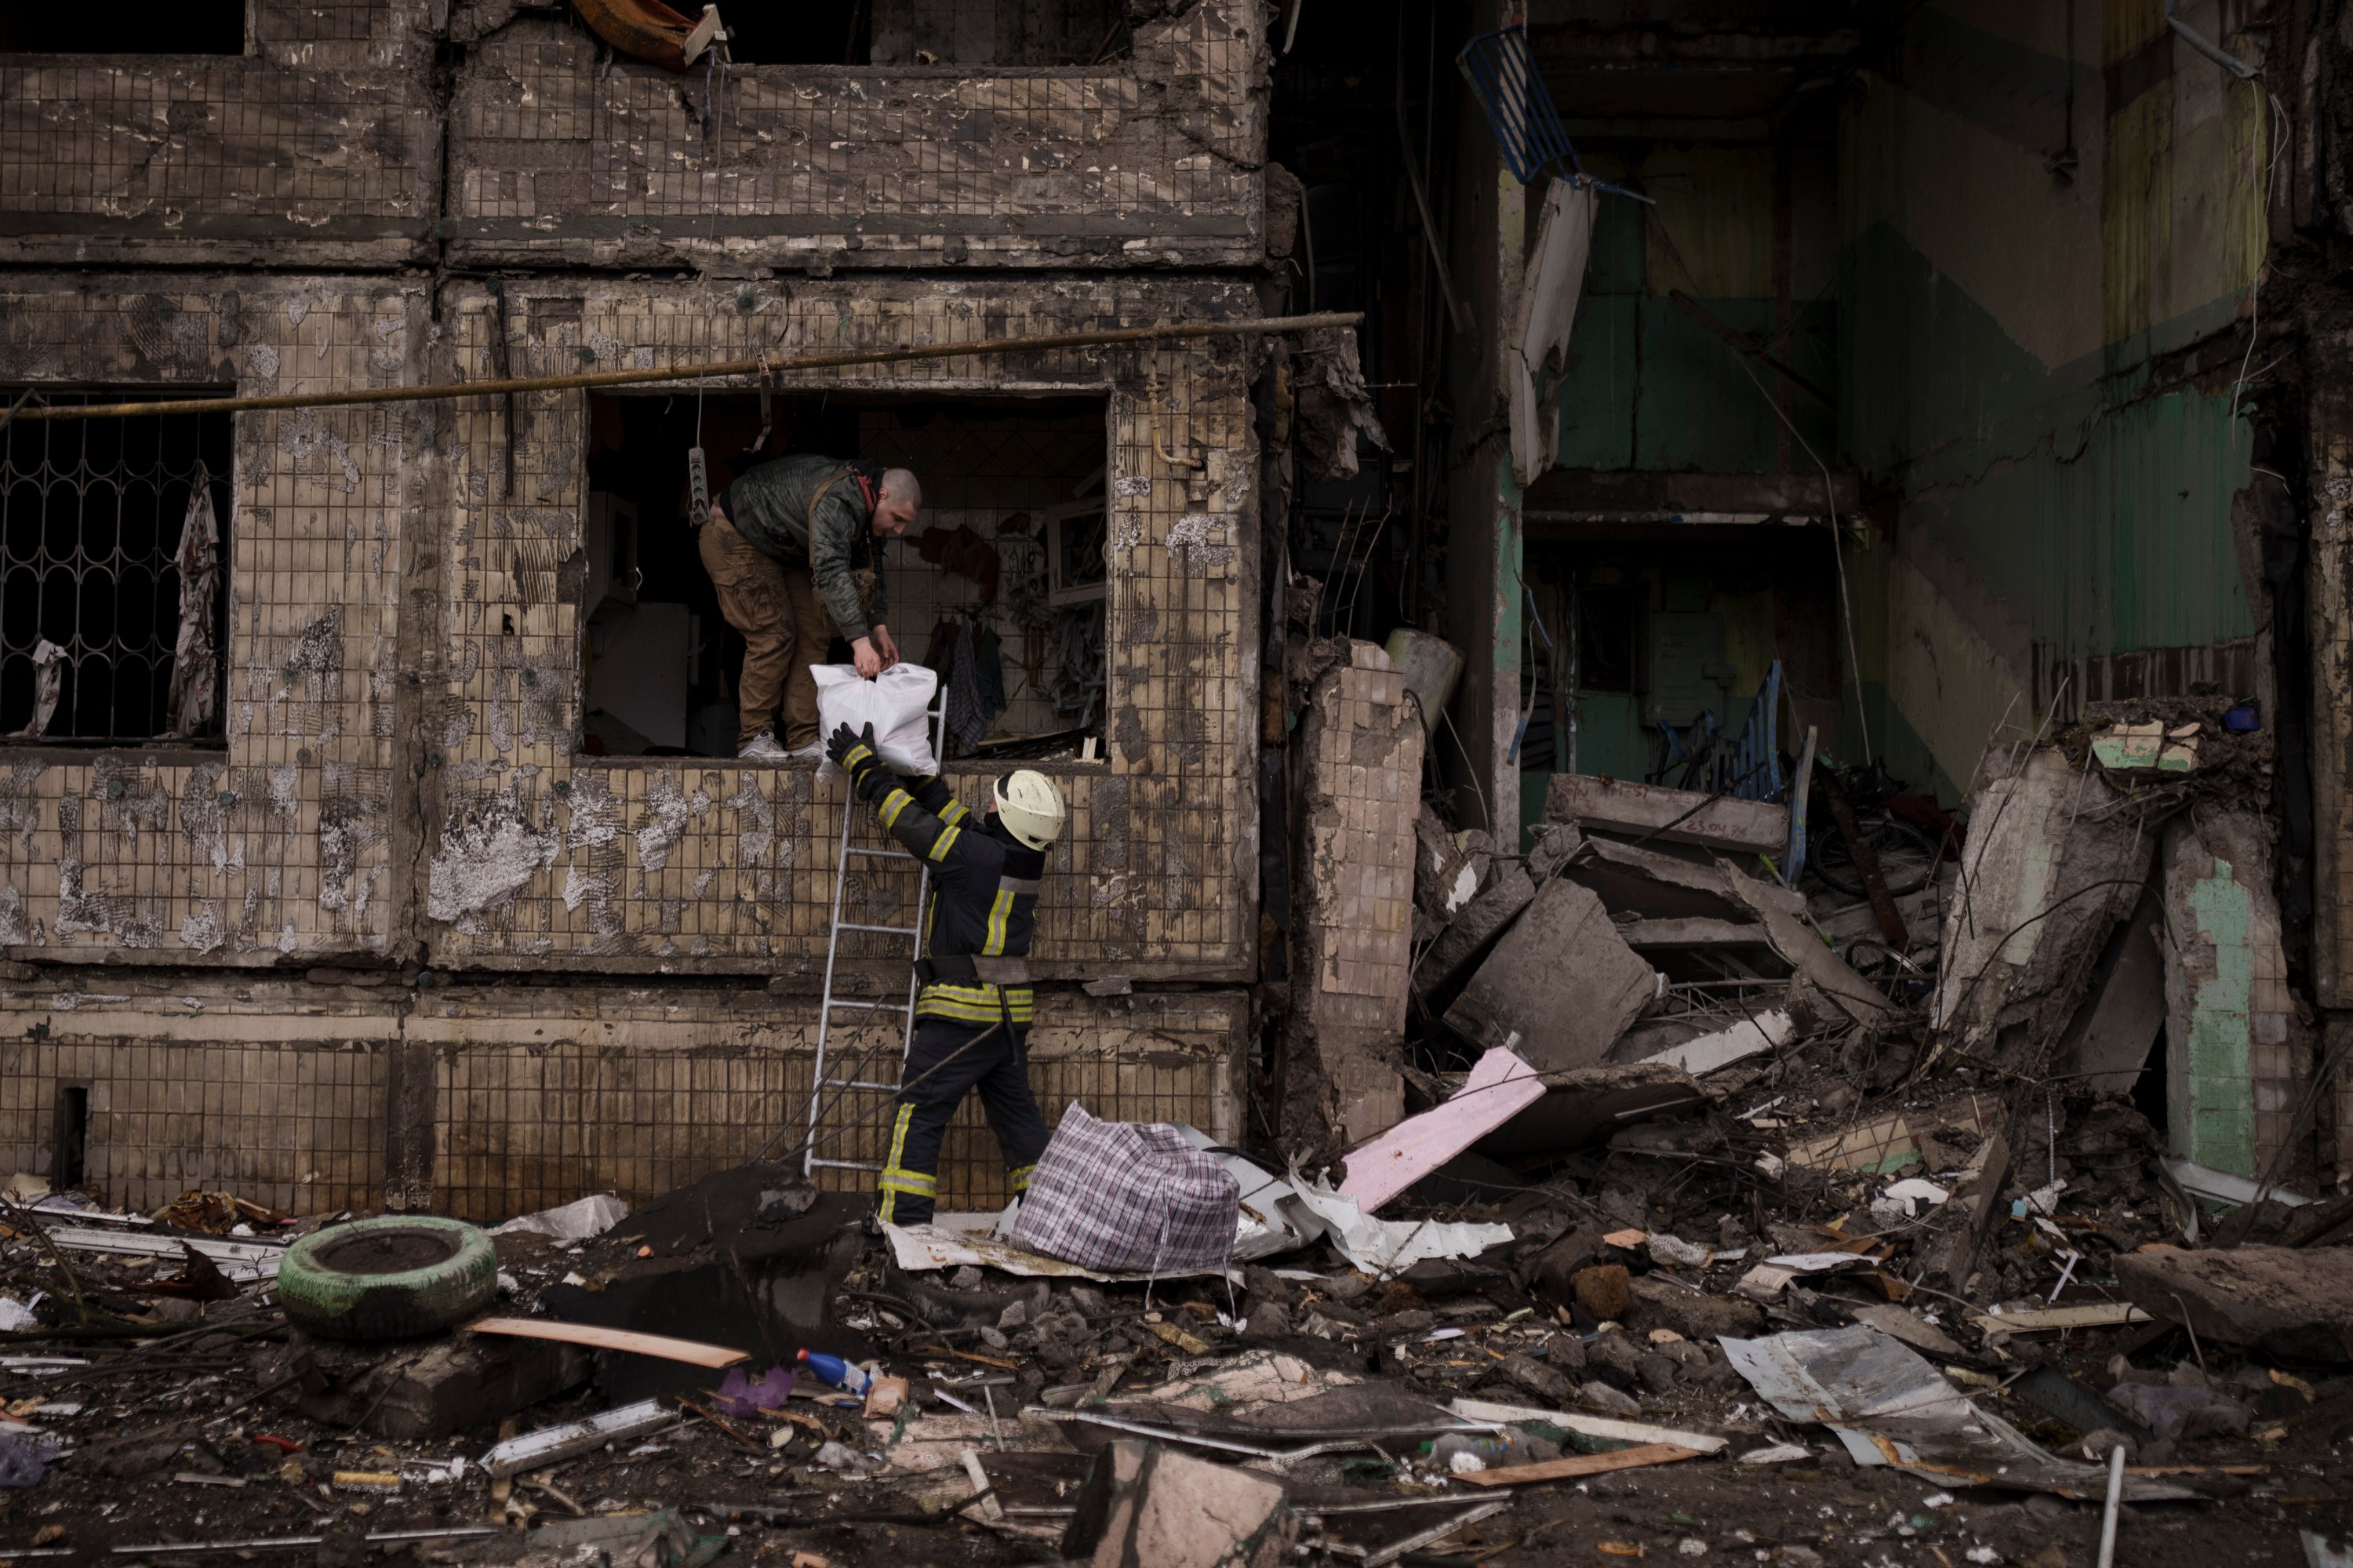 A Ukrainian firefighter helps a man remove belongings from a destroyed building after it was hit by artillery shelling in Kyiv in Kyiv, Ukraine, Monday, March 14, 2022. (AP Photo/Felipe Dana)